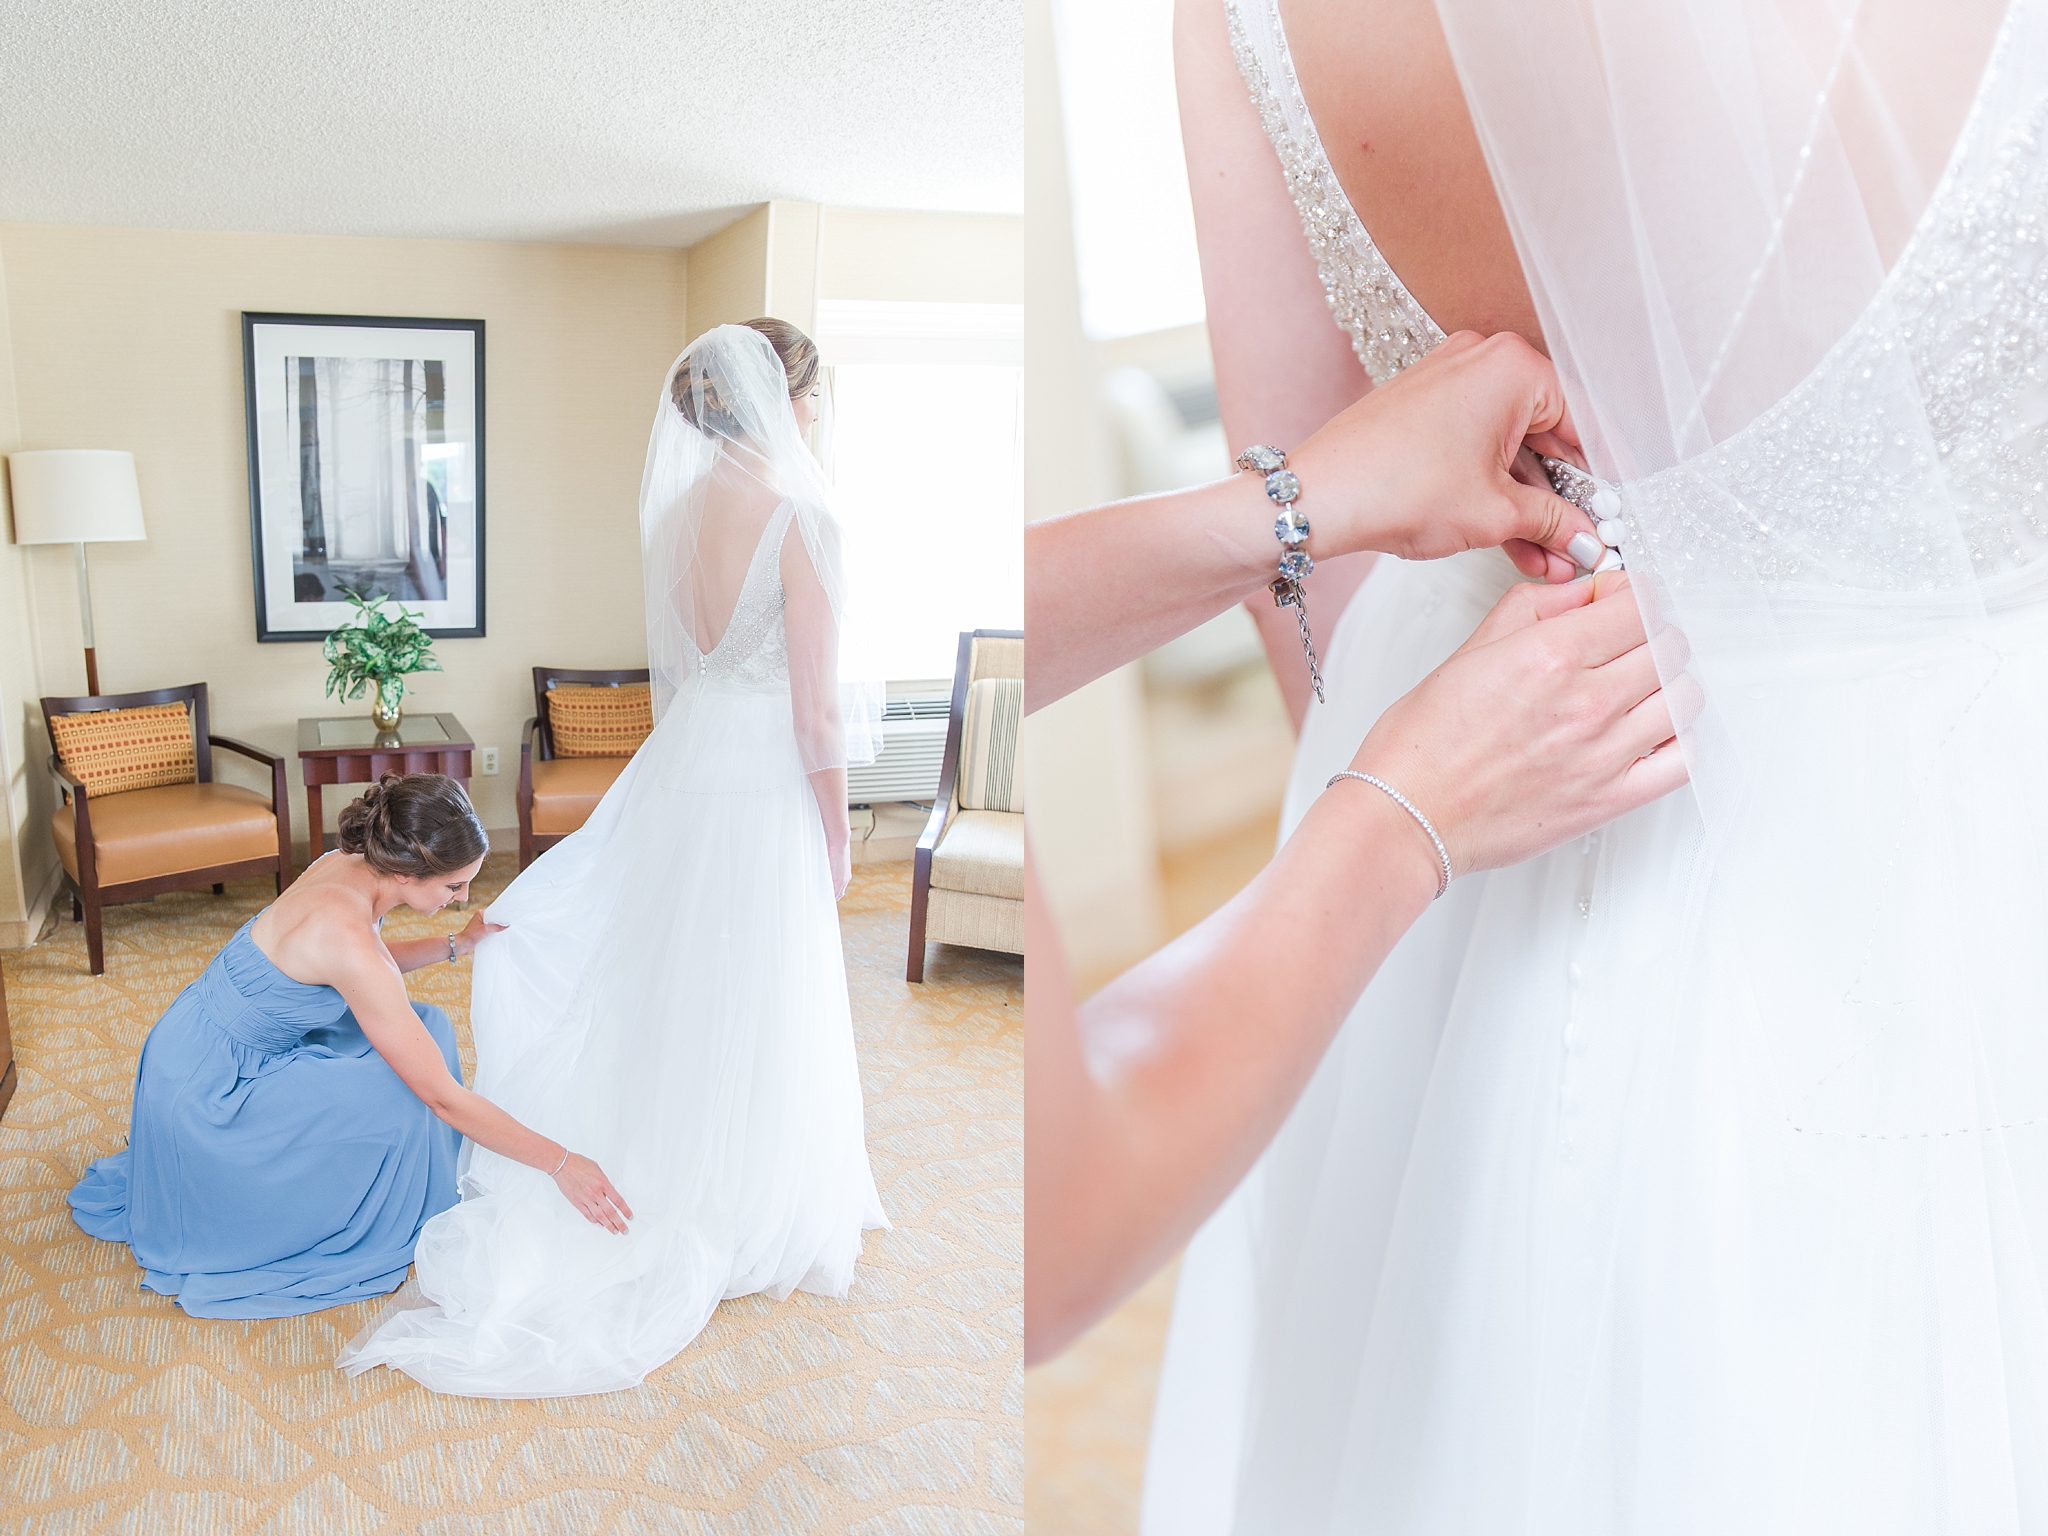 classic-intimate-fun-wedding-photos-at-the-meeting-house-grand-ballroom-in-plymouth-michigan-by-courtney-carolyn-photography_0008.jpg